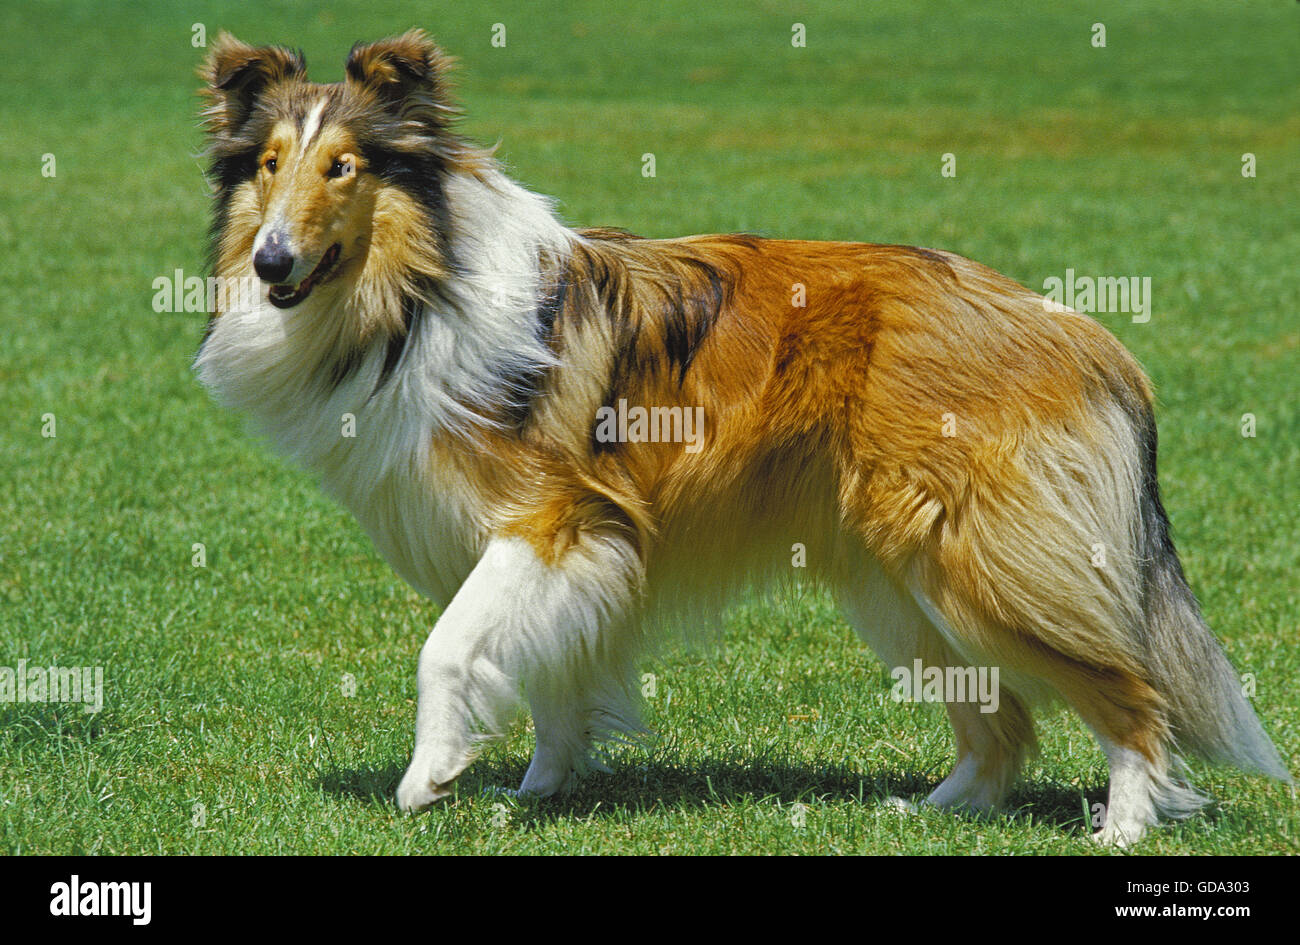 Collie Dog on Lawn Stock Photo